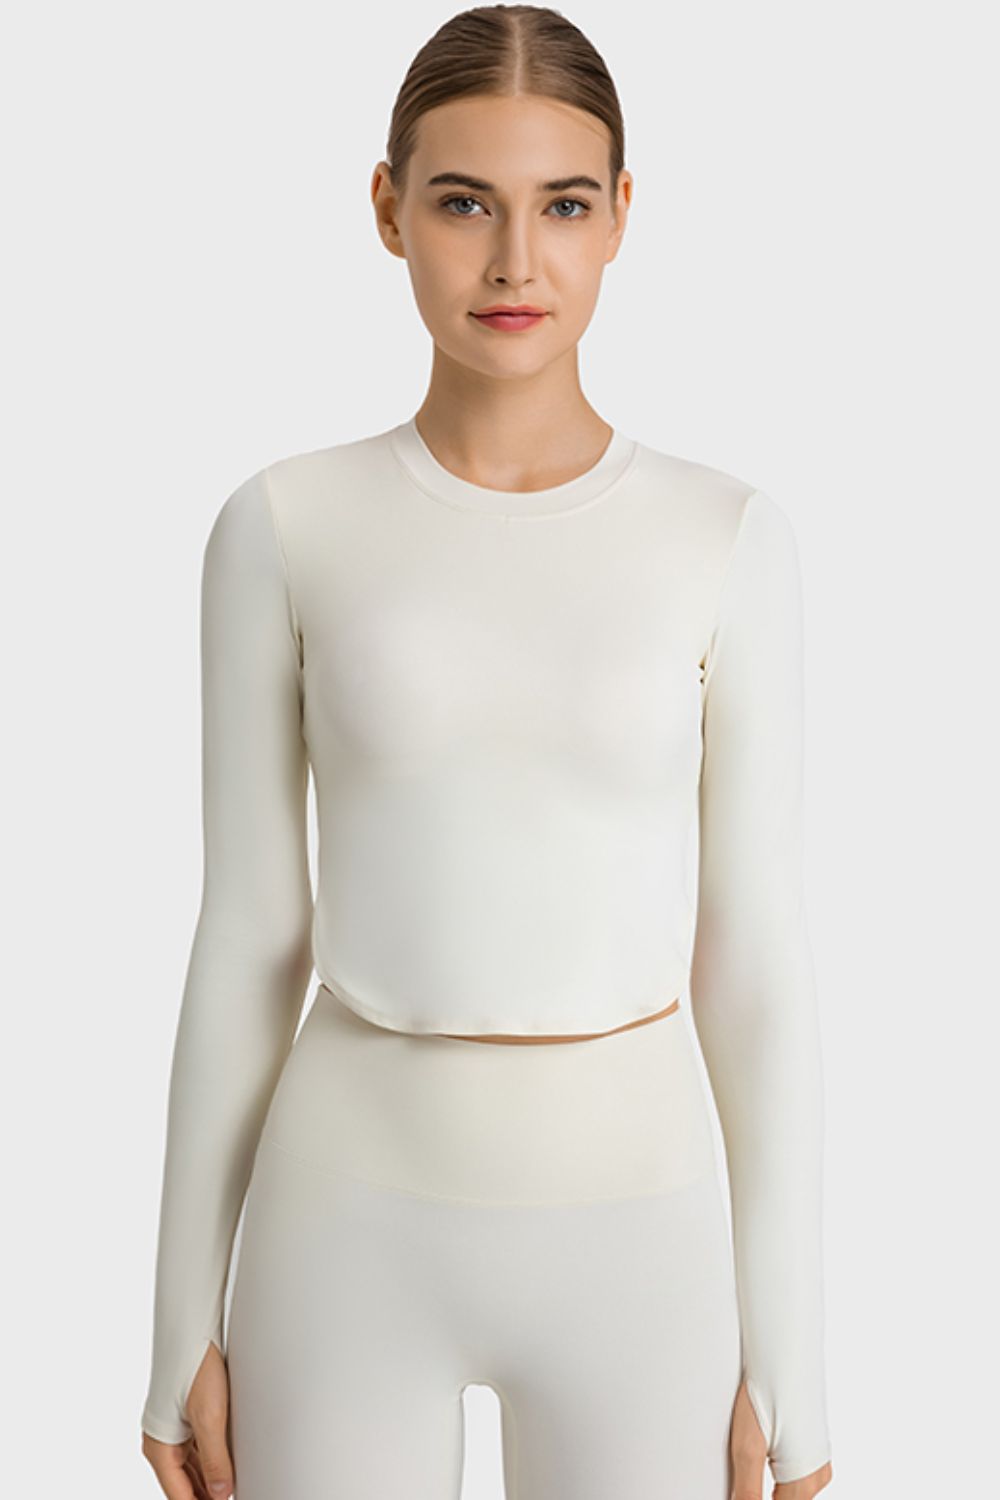 Light Gray Side Slit Long Sleeve Round Neck Crop Top Sentient Beauty Fashions Apaparel & Accessories